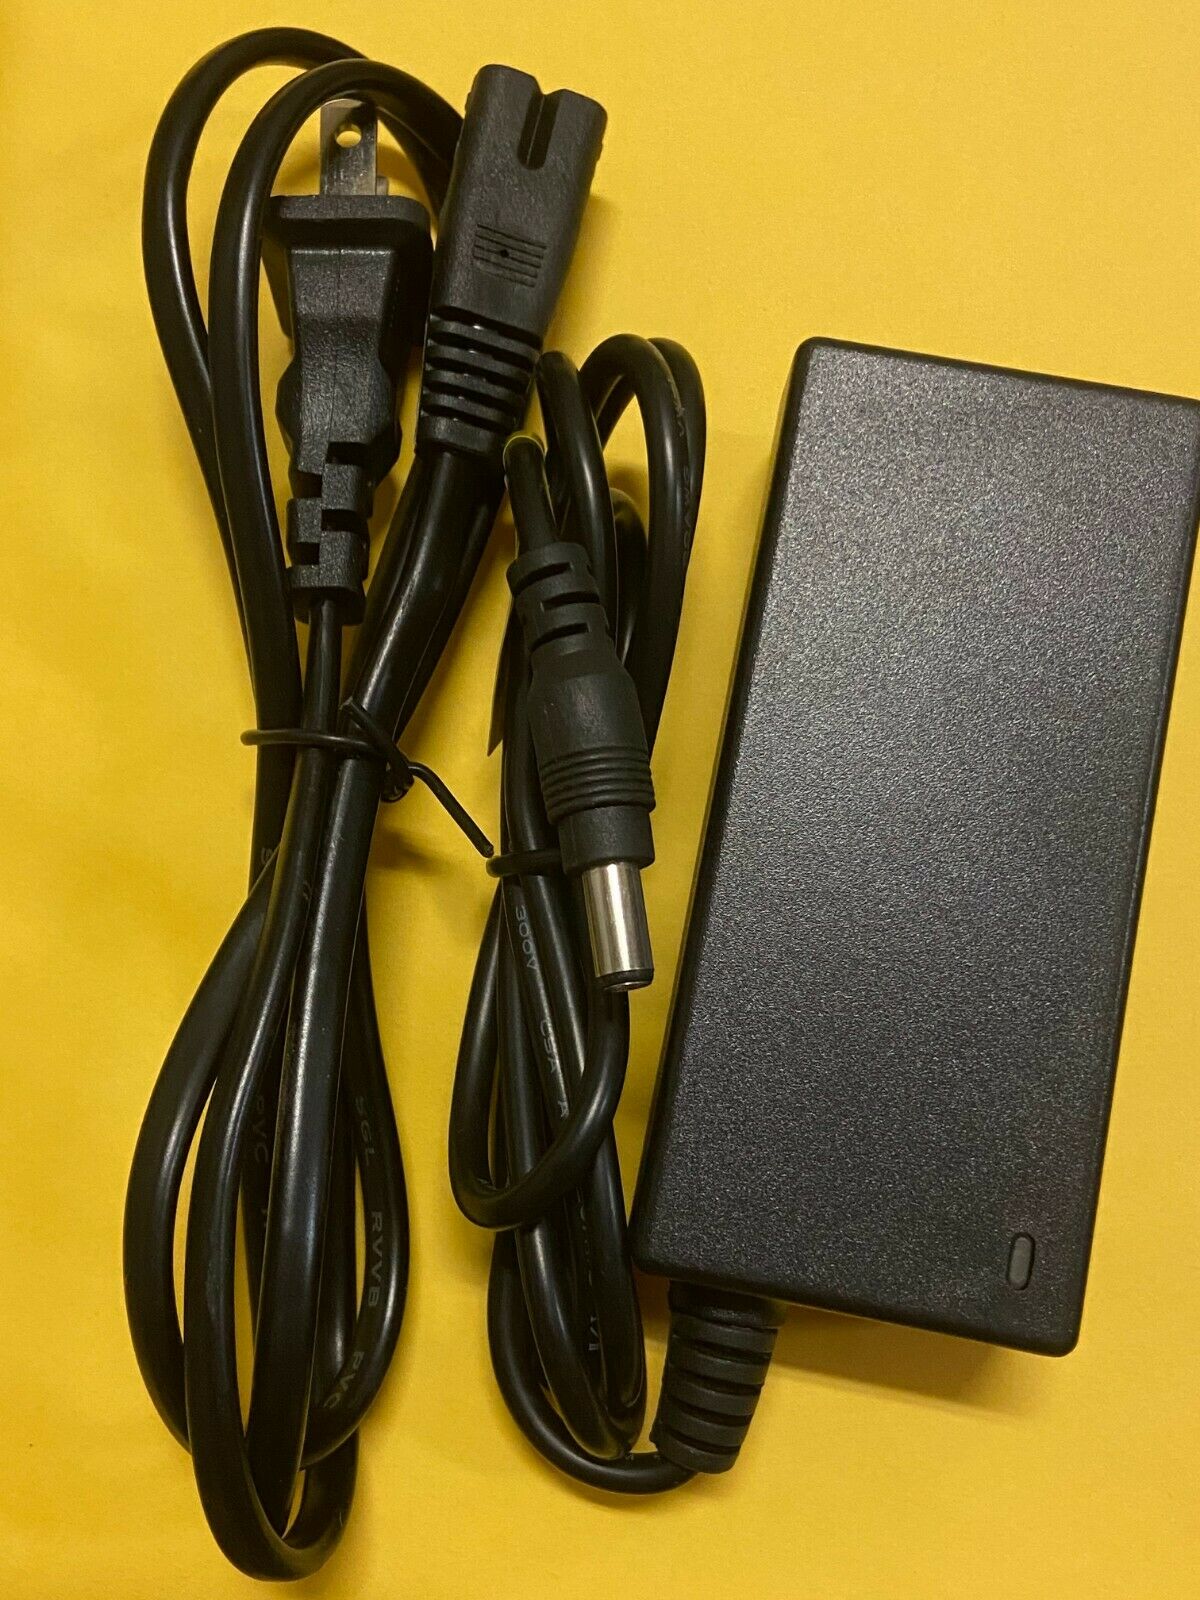 NEW AC-DC Adapter For Onkyo LS-T10 LST10 3D TV Power Supply Cord Battery Charger Technical Specifications: 1 AC input - Click Image to Close